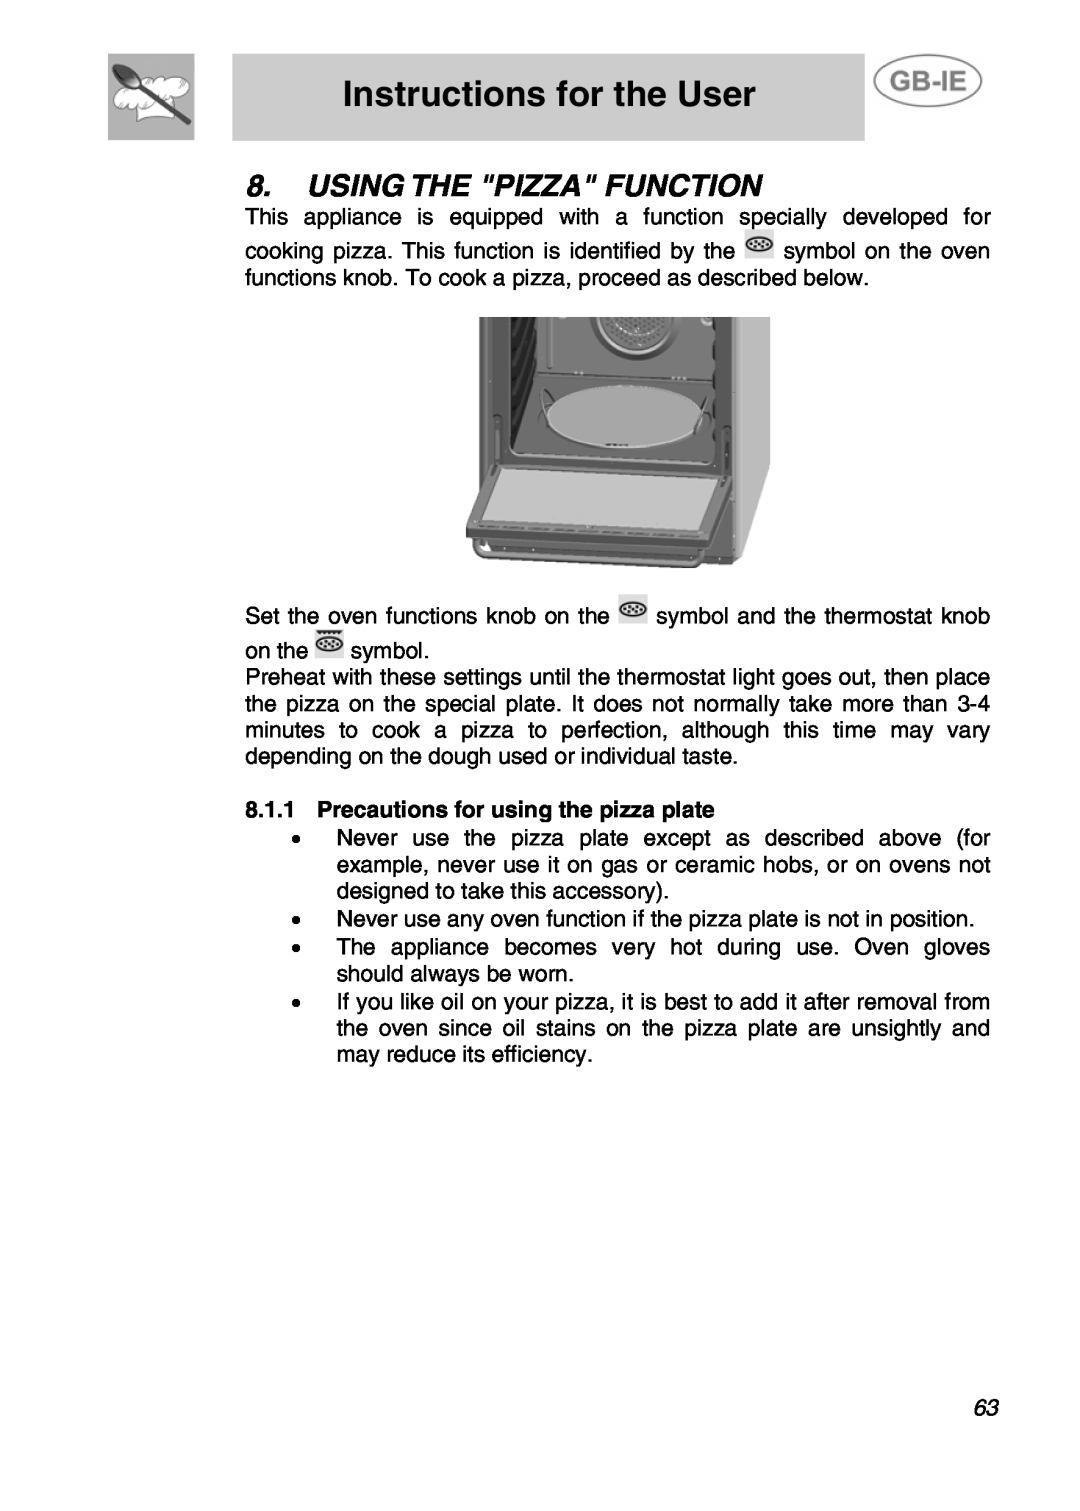 Smeg A4-5 manual Using The Pizza Function, 8.1.1Precautions for using the pizza plate, Instructions for the User 